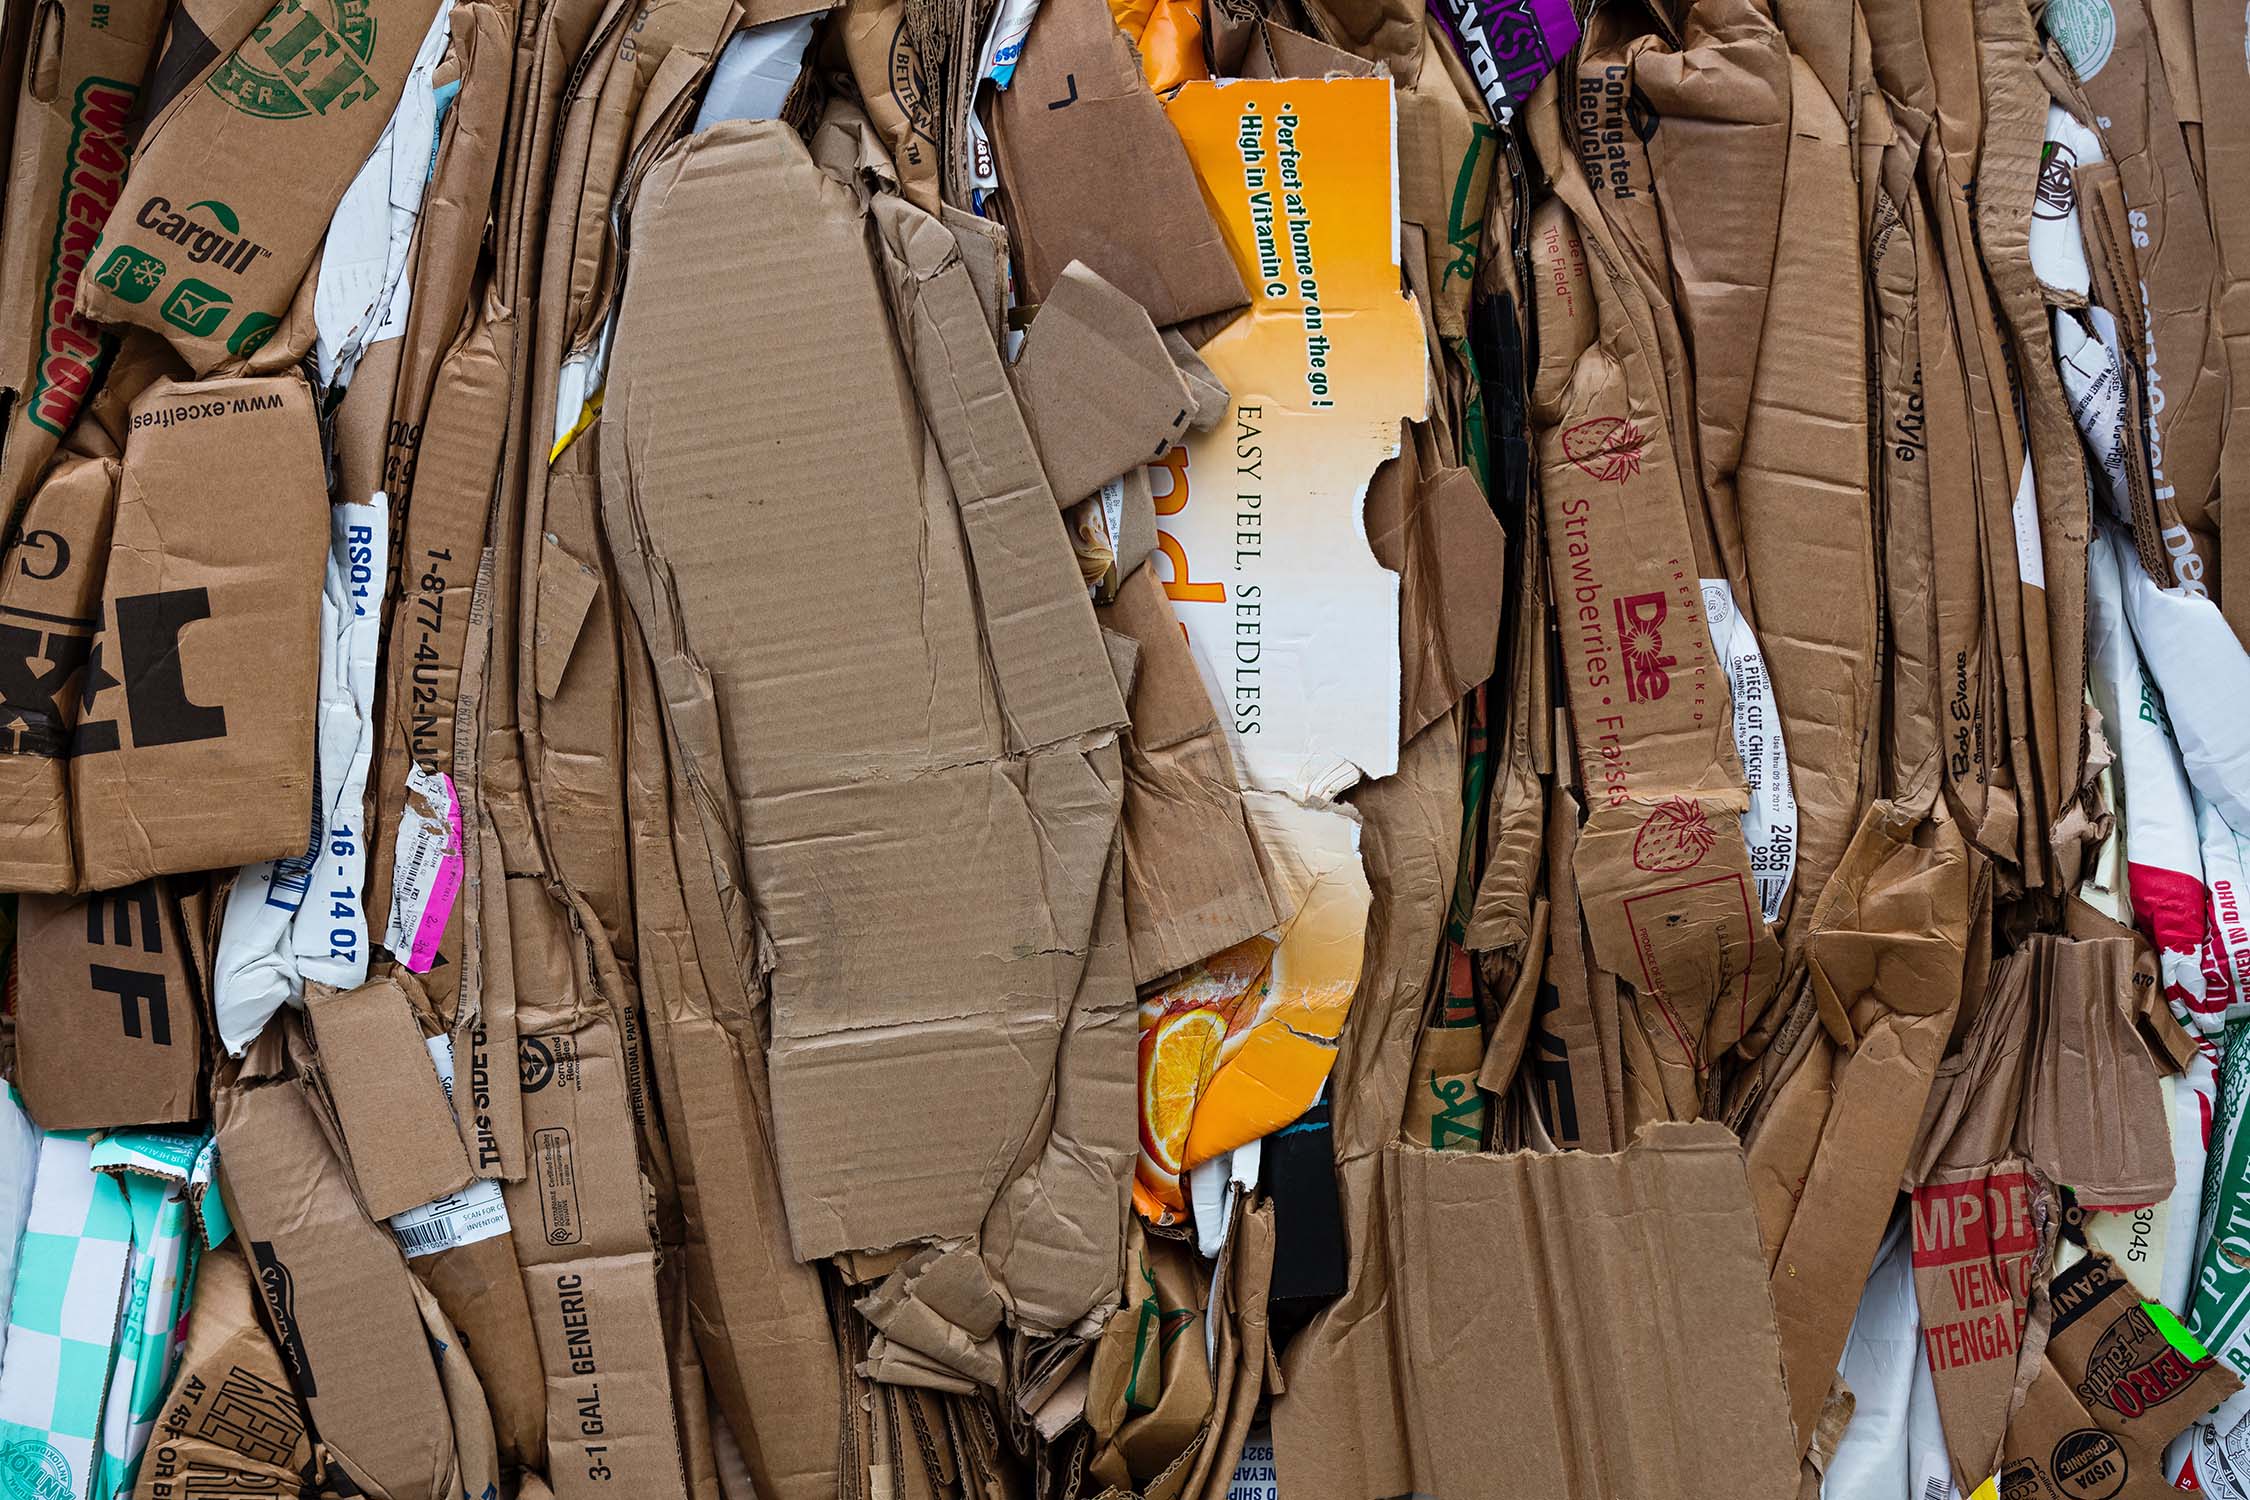 Broken down cardboard recycling that helps make recycling and transportation more efficient.